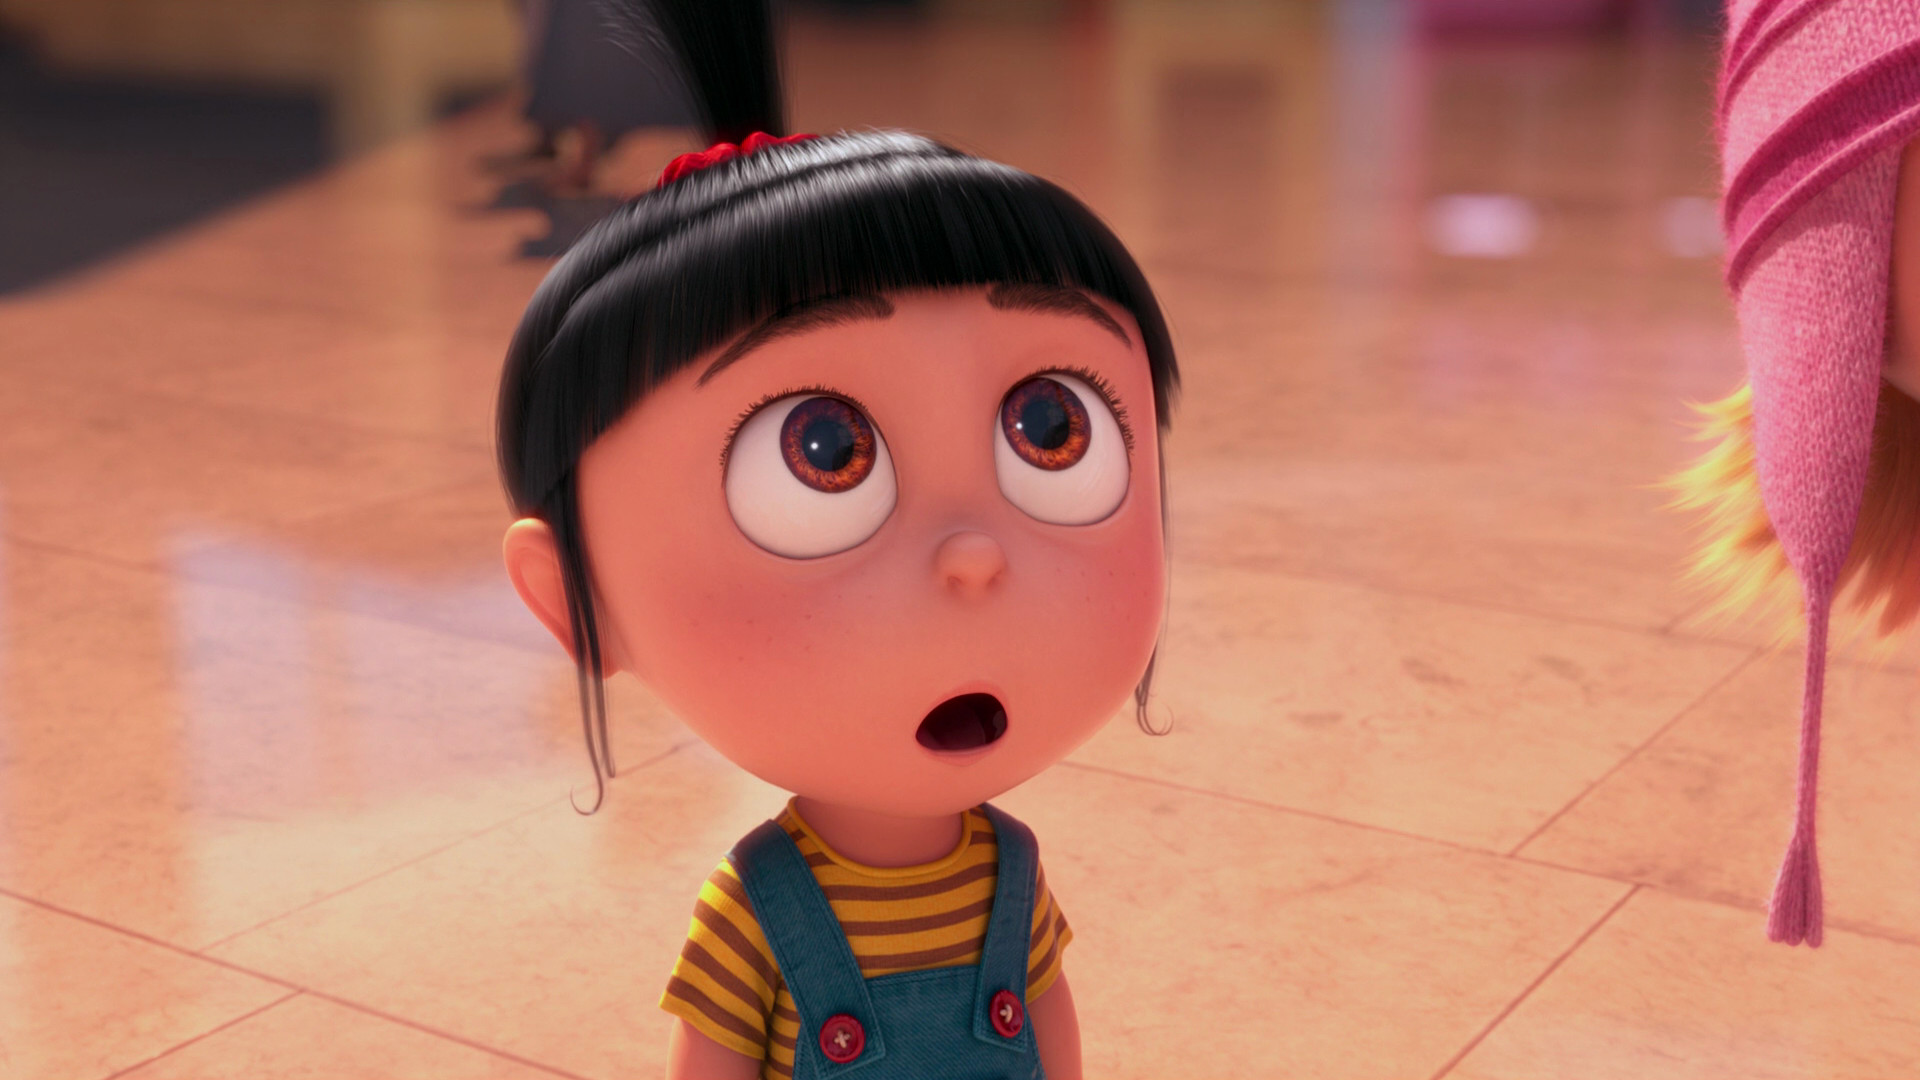 1920x1080 Get free high quality HD wallpapers agnes despicable me wallpaper hd